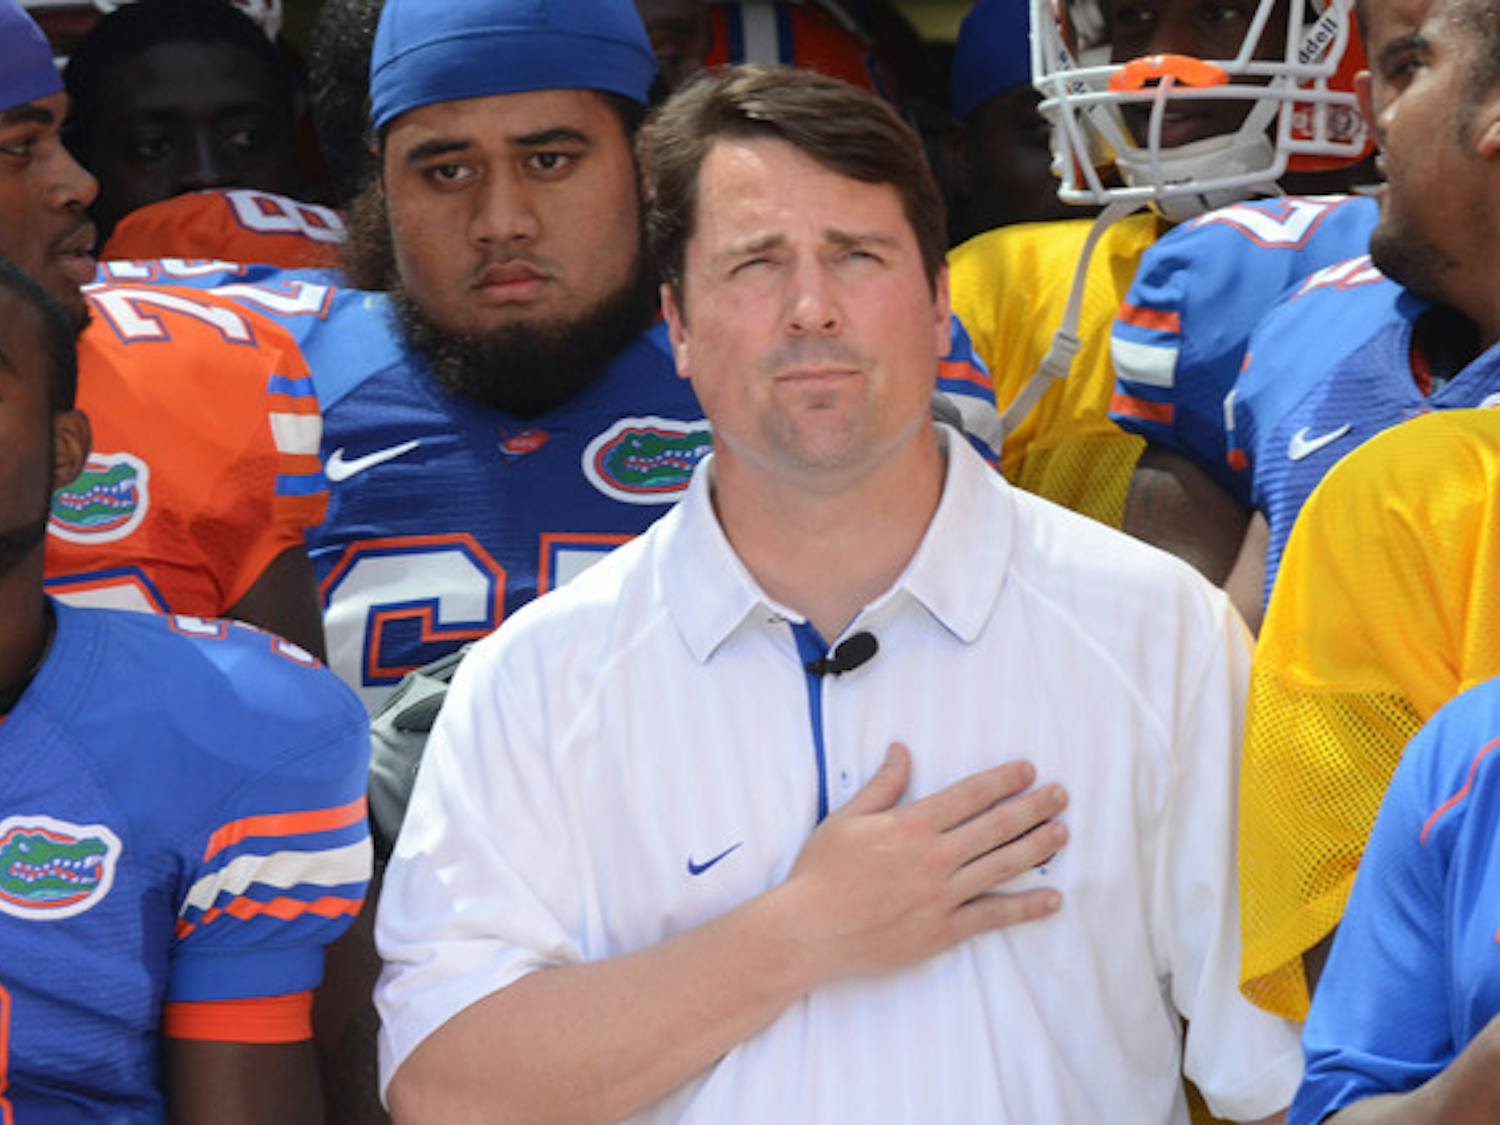 Florida coach Will Muschamp said his teams would represent the "Florida Way." He dismissed troubled corner Janoris Jenkins and has disciplined others facing off-the-field issues.&nbsp;